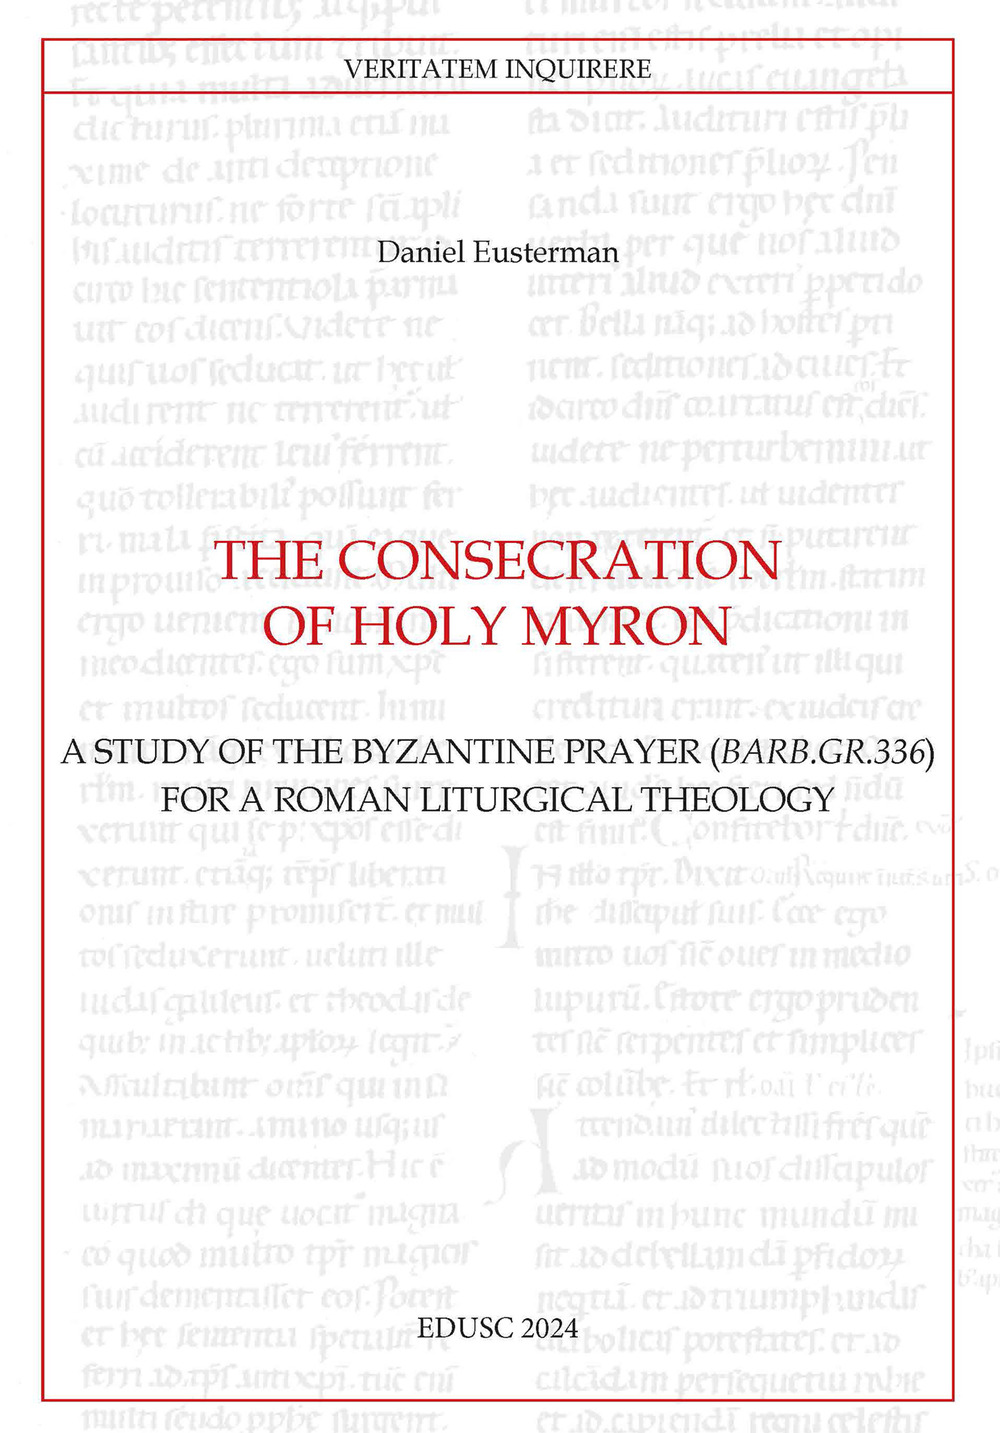 The consecration of Holy Myron. A study of the byzantine prayer (Barb.gr.336) for a roman liturgical theology